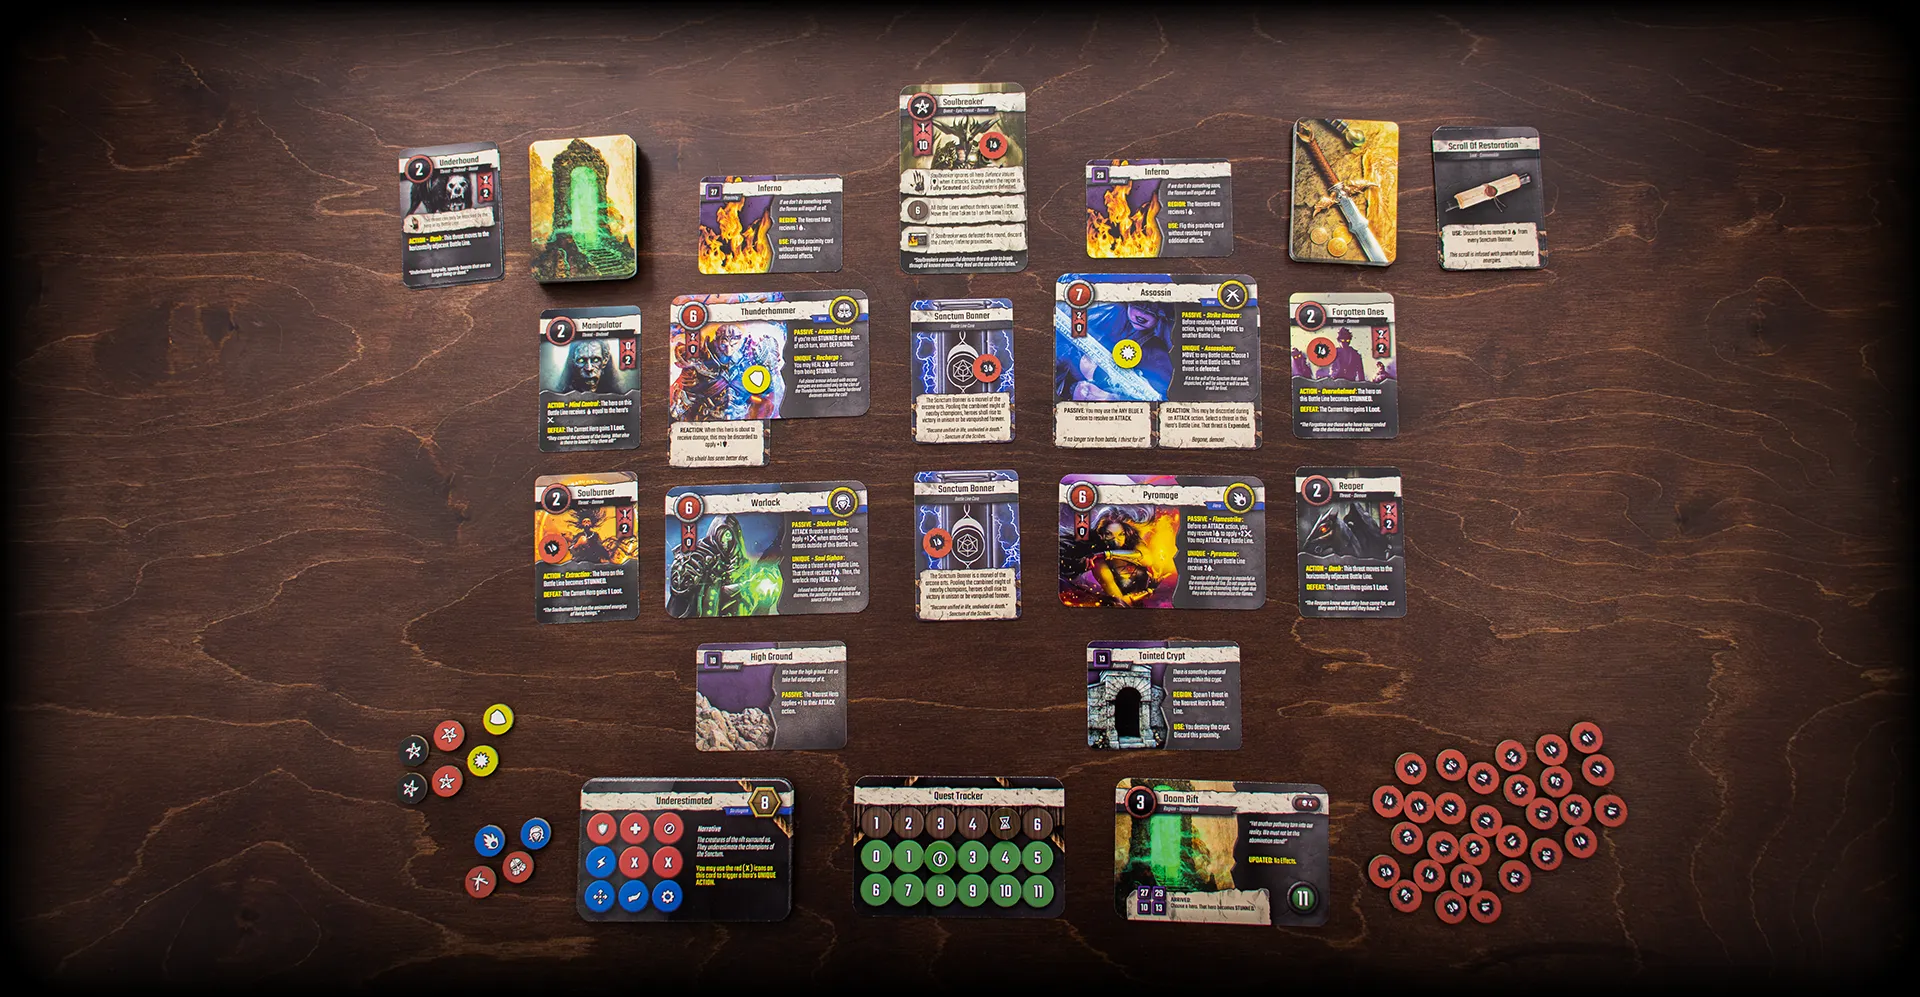 Heroes of the Sanctum game being played on wood table